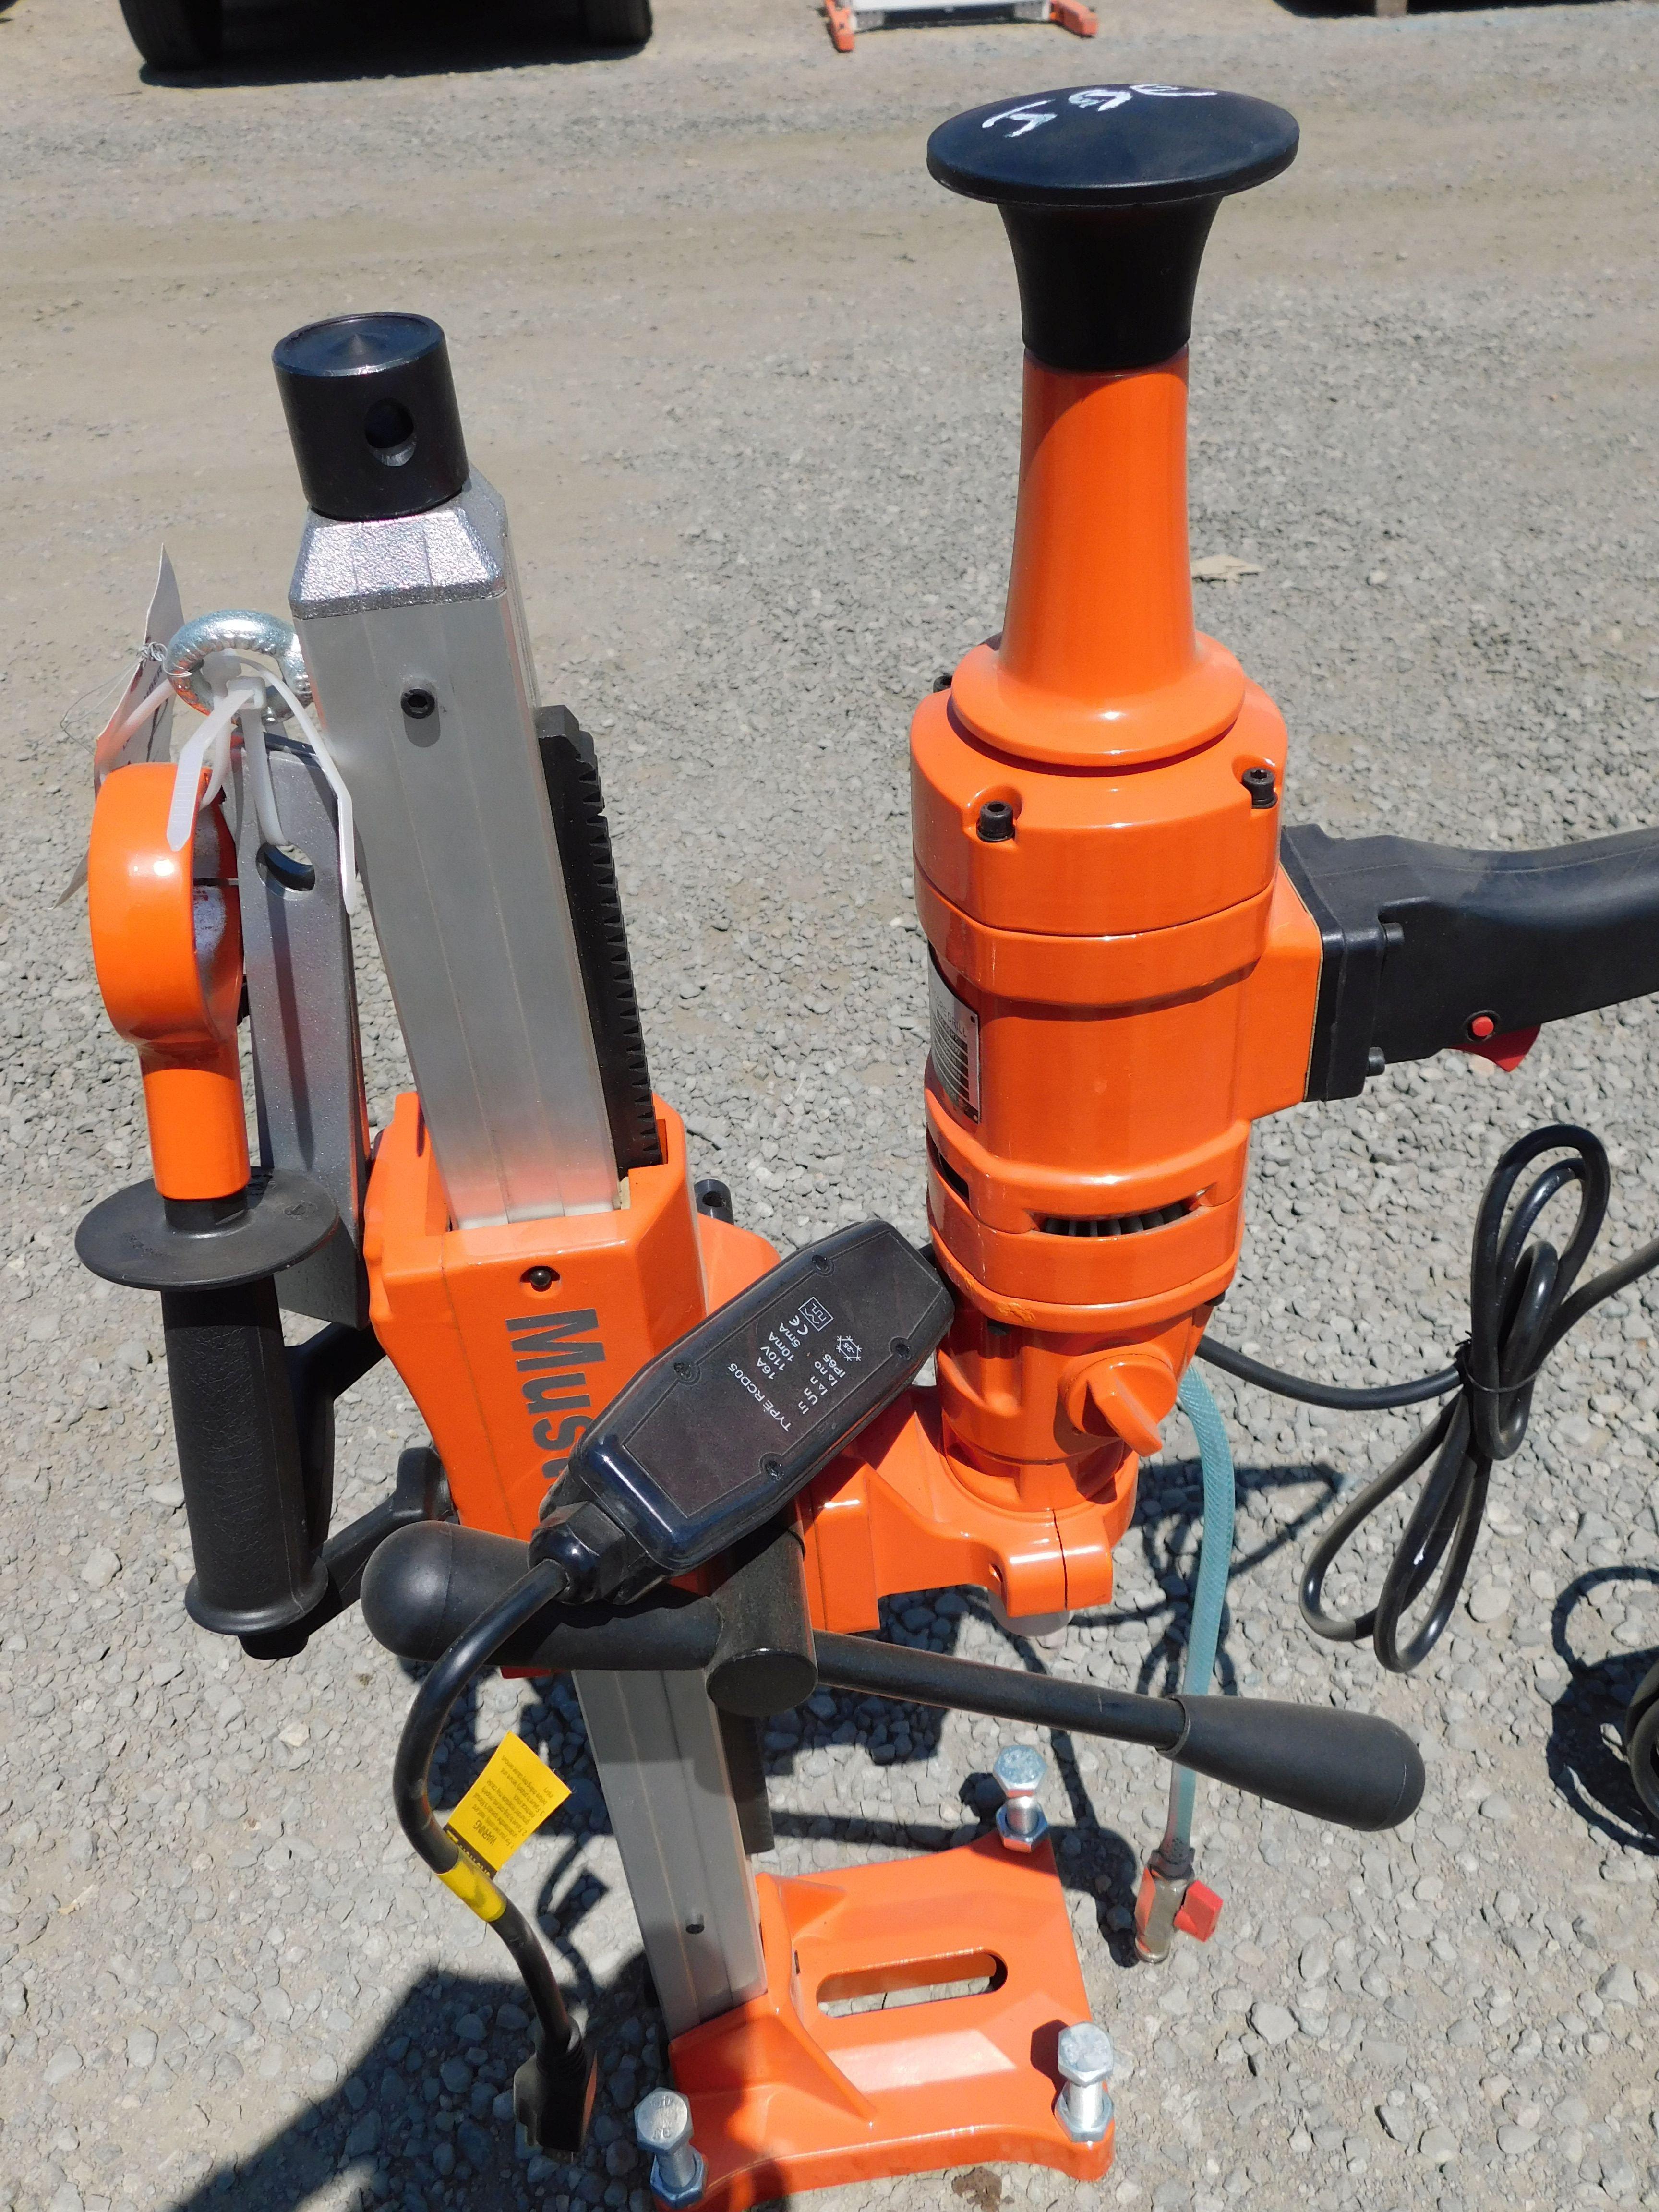 NEW & UNUSED MUSTANG ELECTRIC CORE DRILL